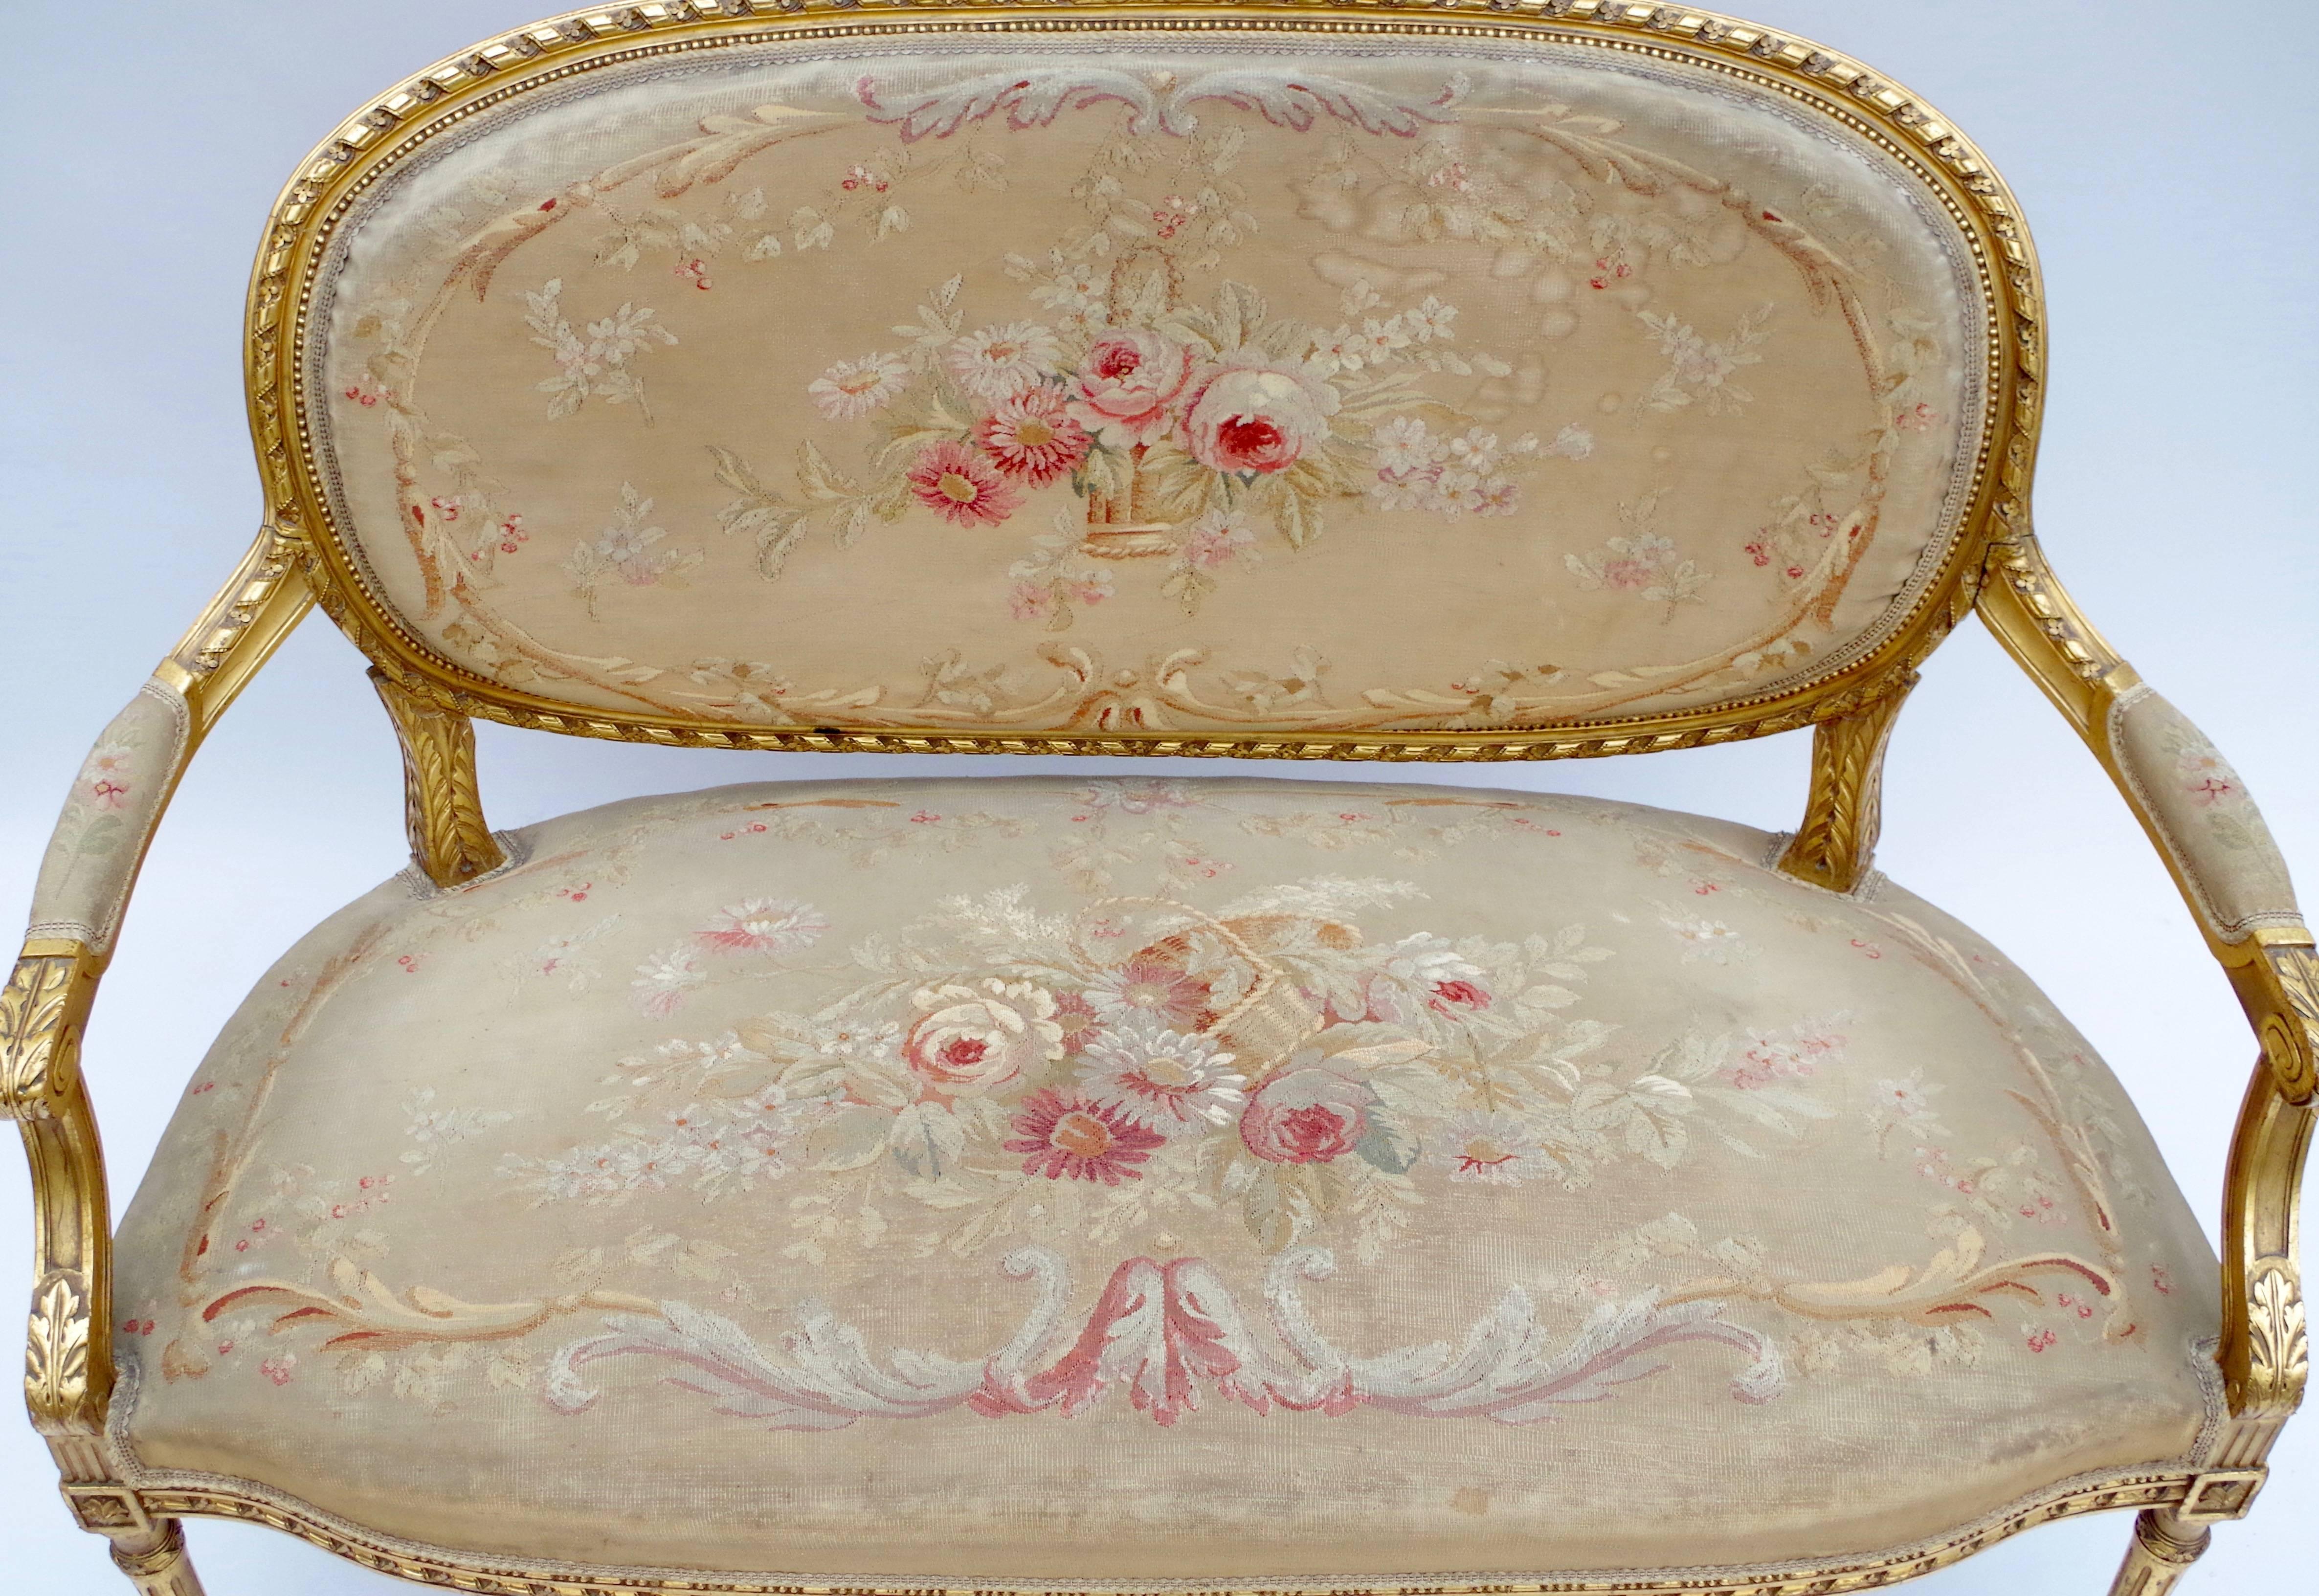 - Set of four armchairs and small sofa
- Carved and molded giltwood
- Decoration of twisted ribbons, flowers, acanthus leaves and rosette
- Fluted tapering legs
- Original Aubusson tapestry fabric
- Louis XVI style
- circa